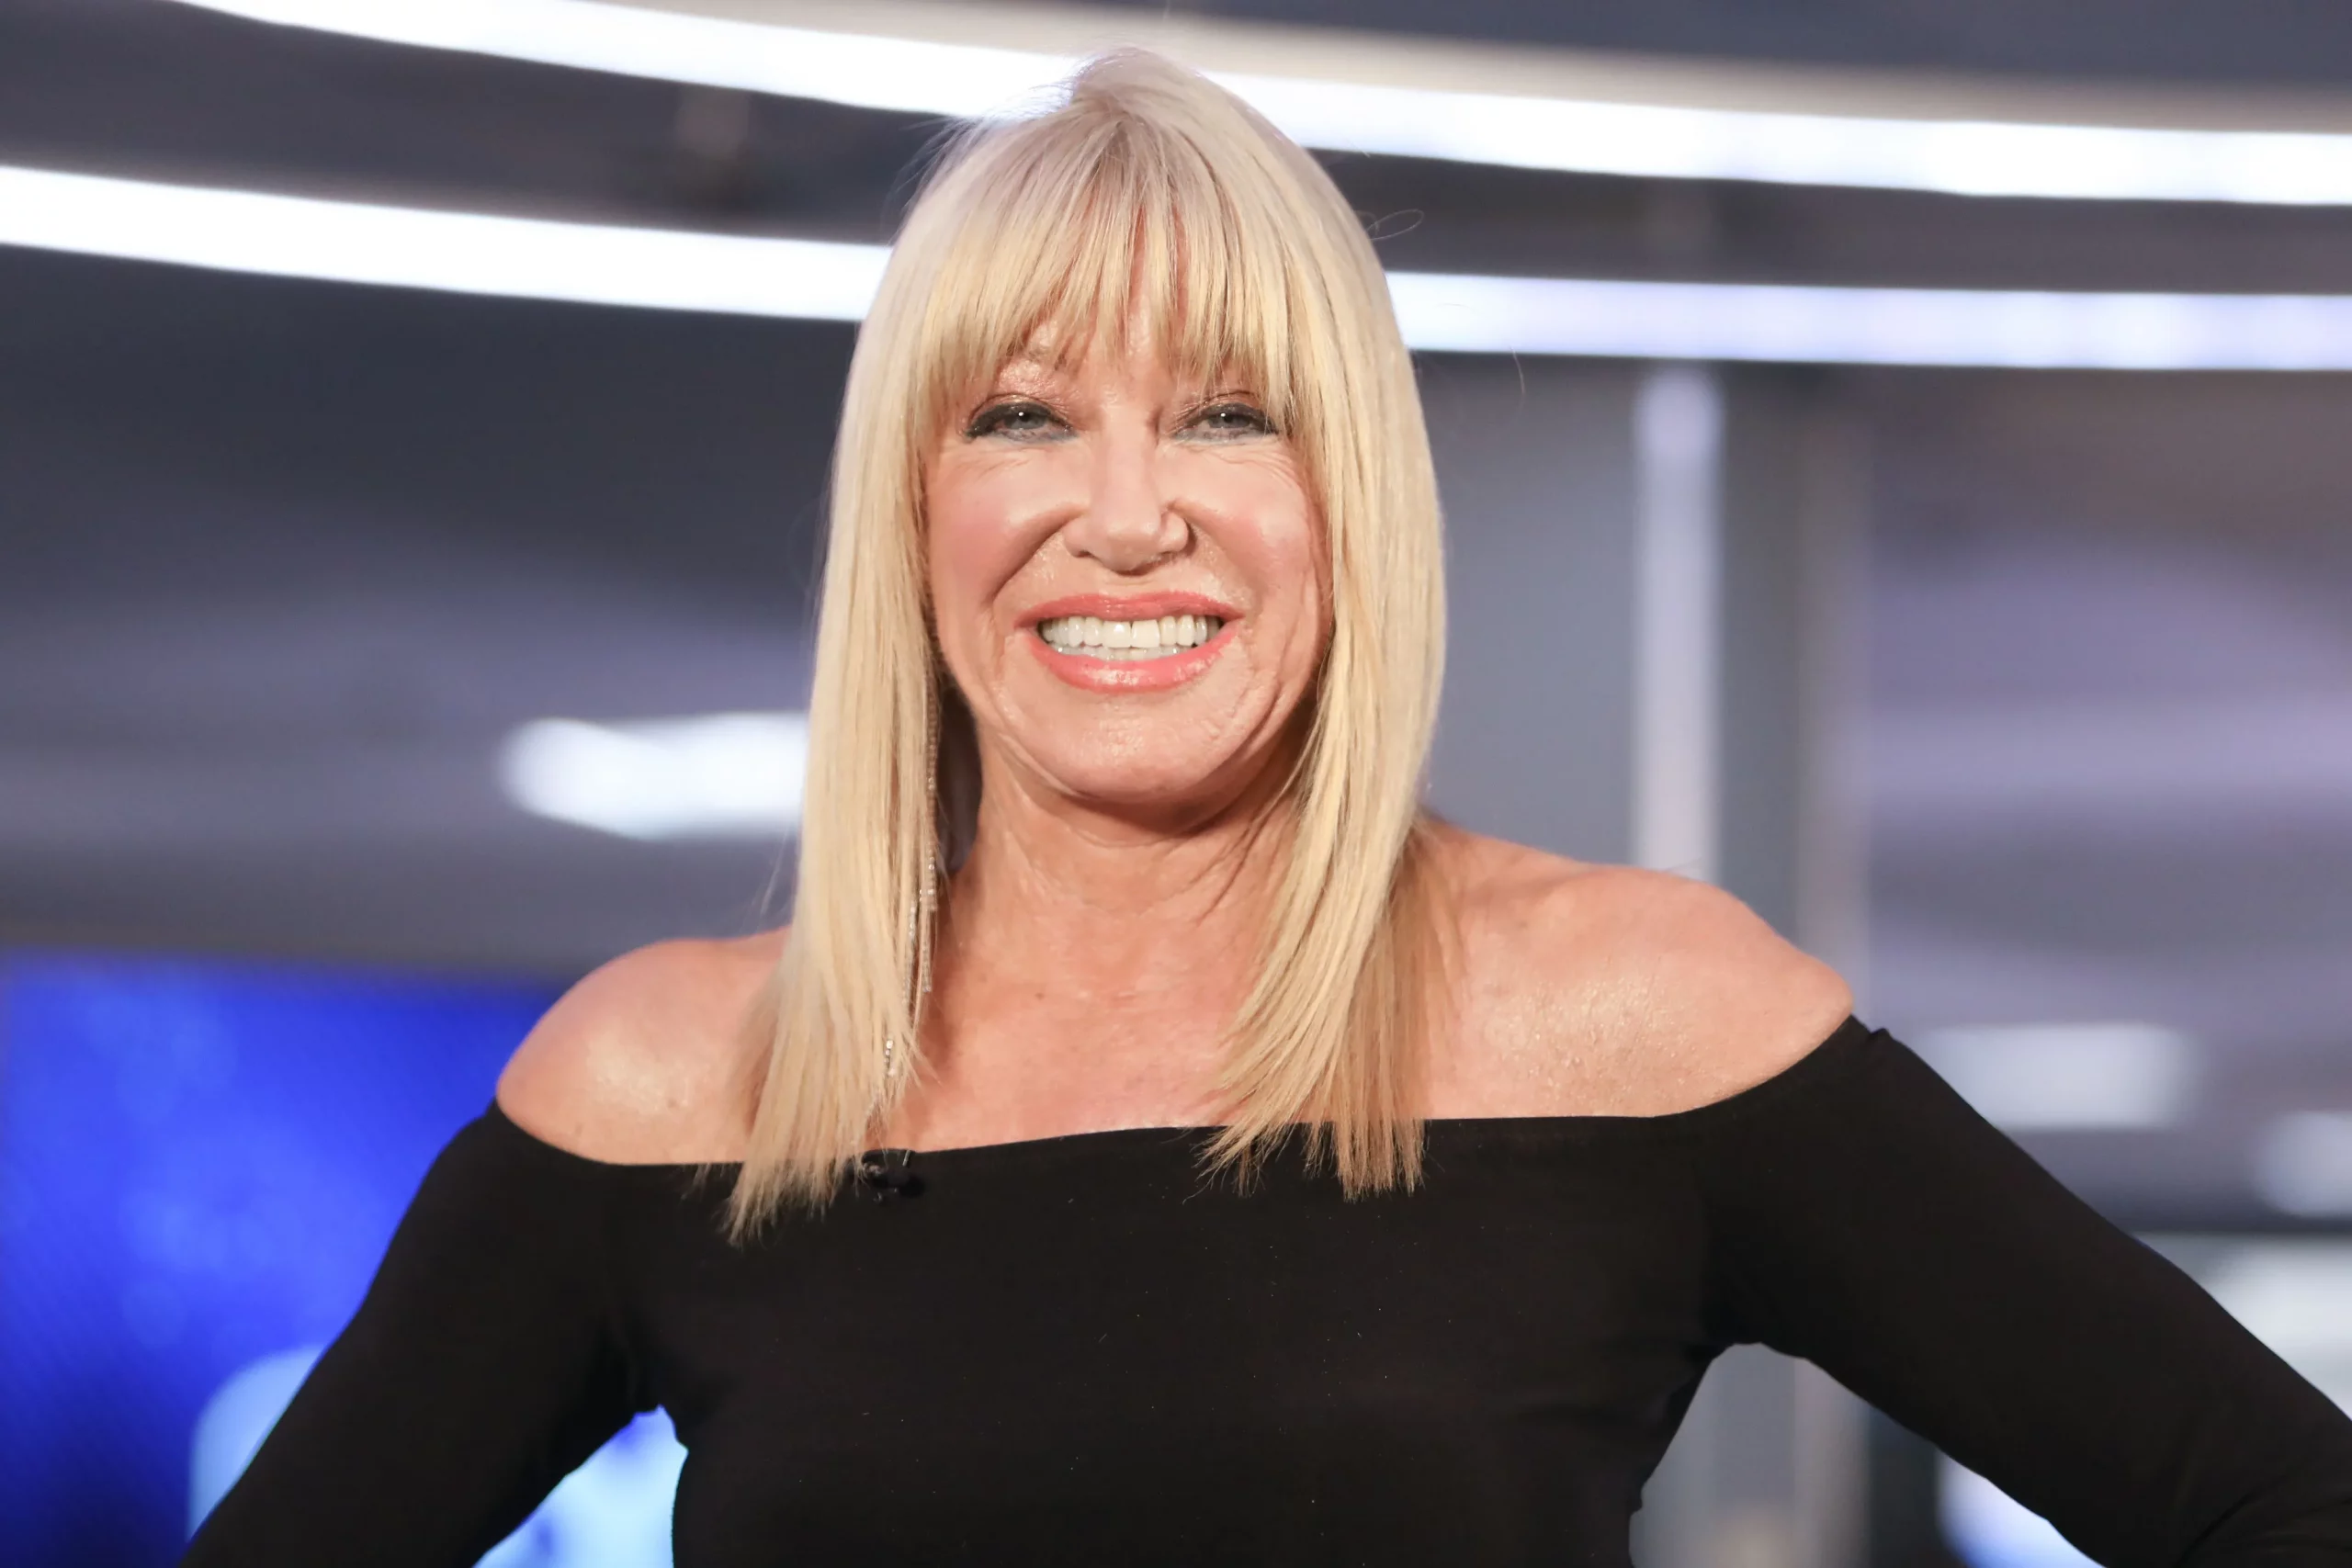 Suzanne Somers Partner: Is She Married or Dating?